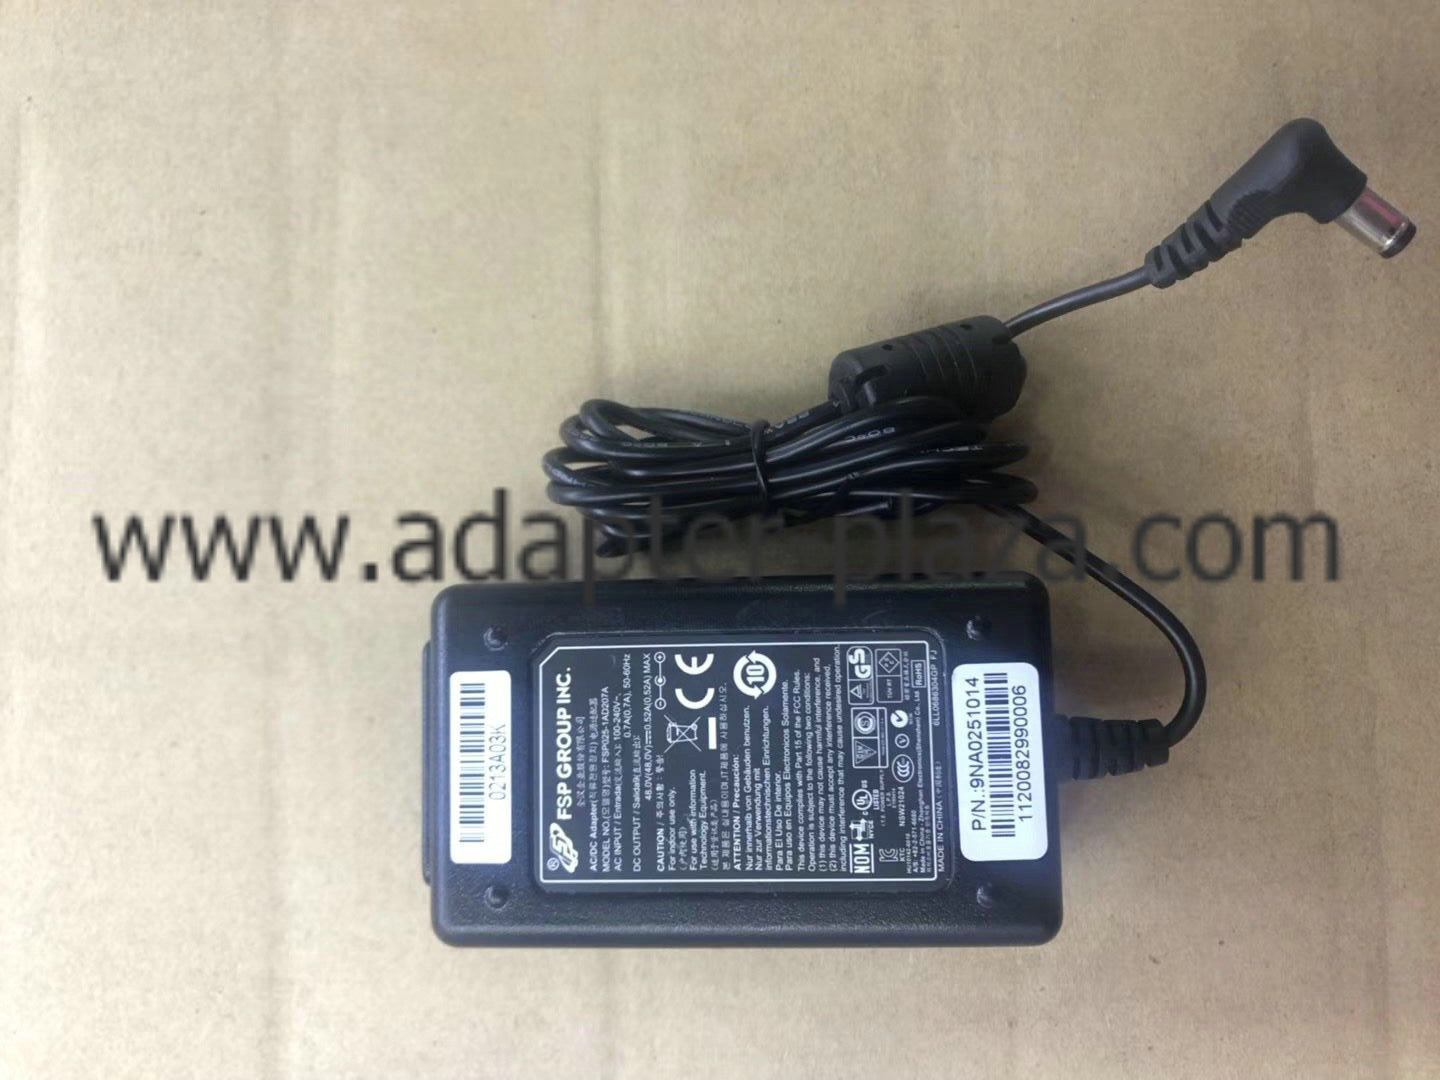 *Brand NEW*48.0V 0.52A AC Adapter FSP FSP025-1AD207A POWER SUPPLY